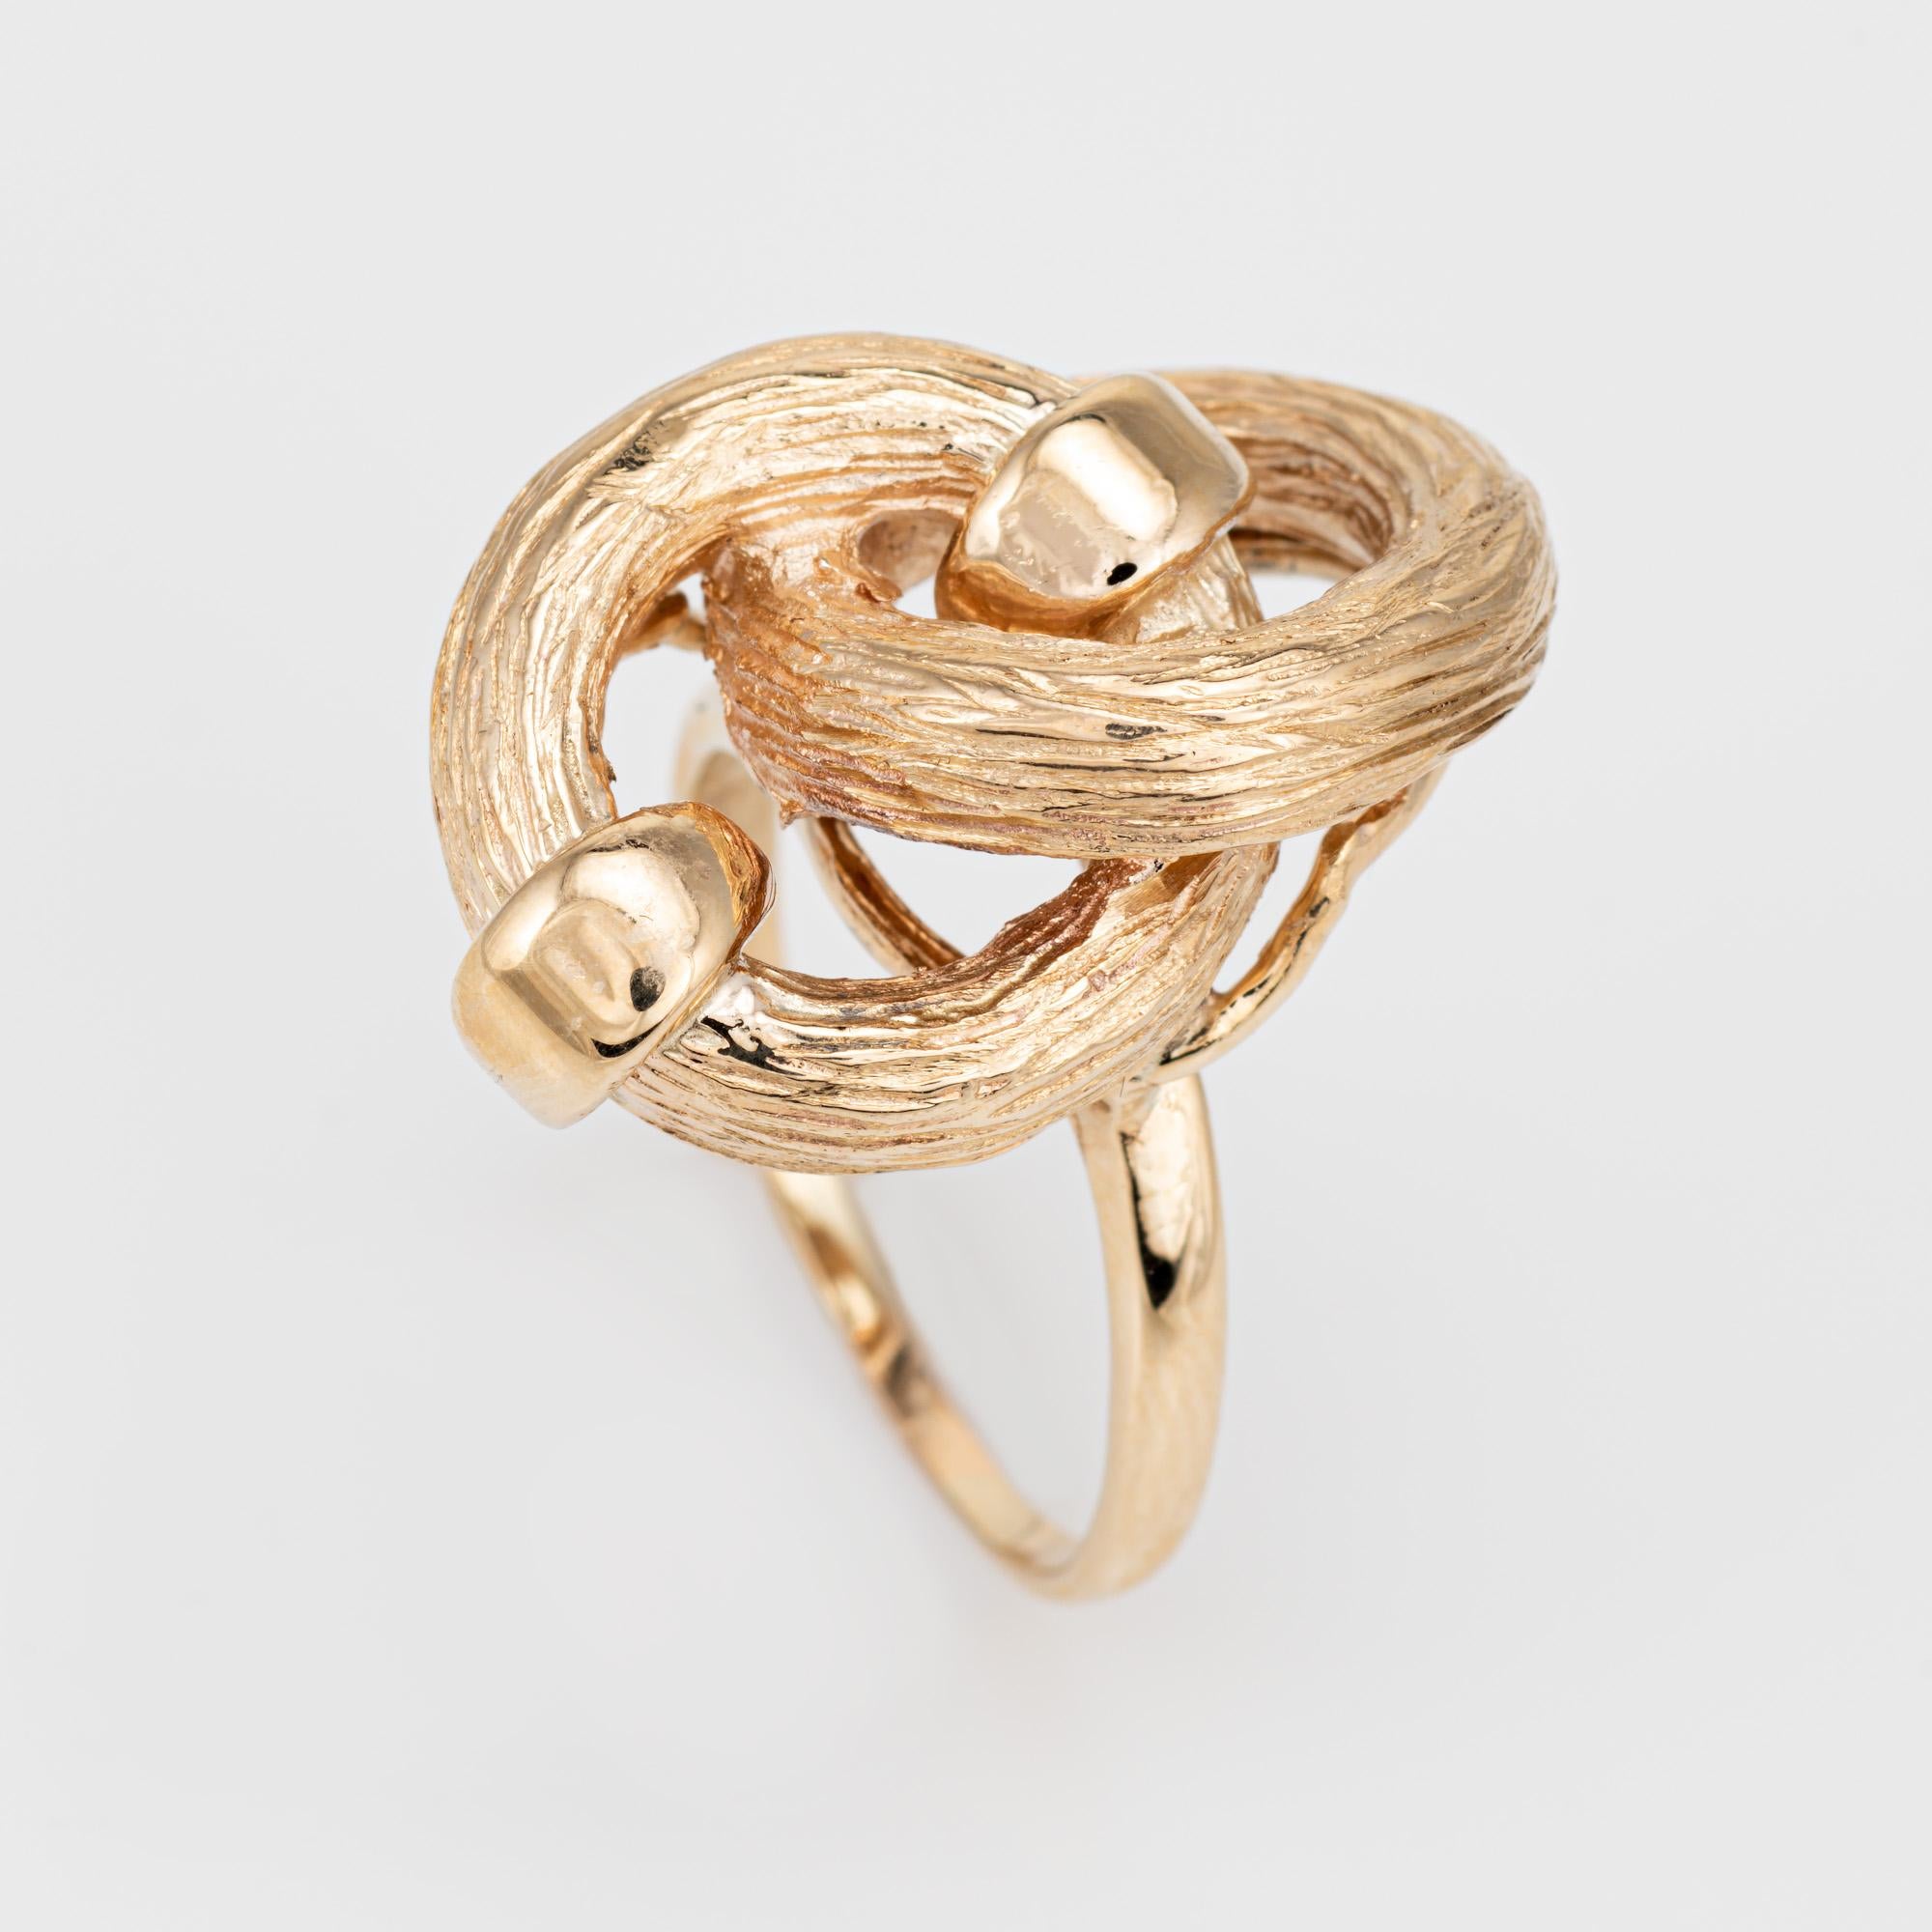 Stylish vintage infinity knot ring crafted in 14 karat yellow gold (circa 1970s). 

The infinity knot design is a meaningful symbol of interconnectedness and limitless possibilities. A timeless design that is a reminder of the enduring bond between